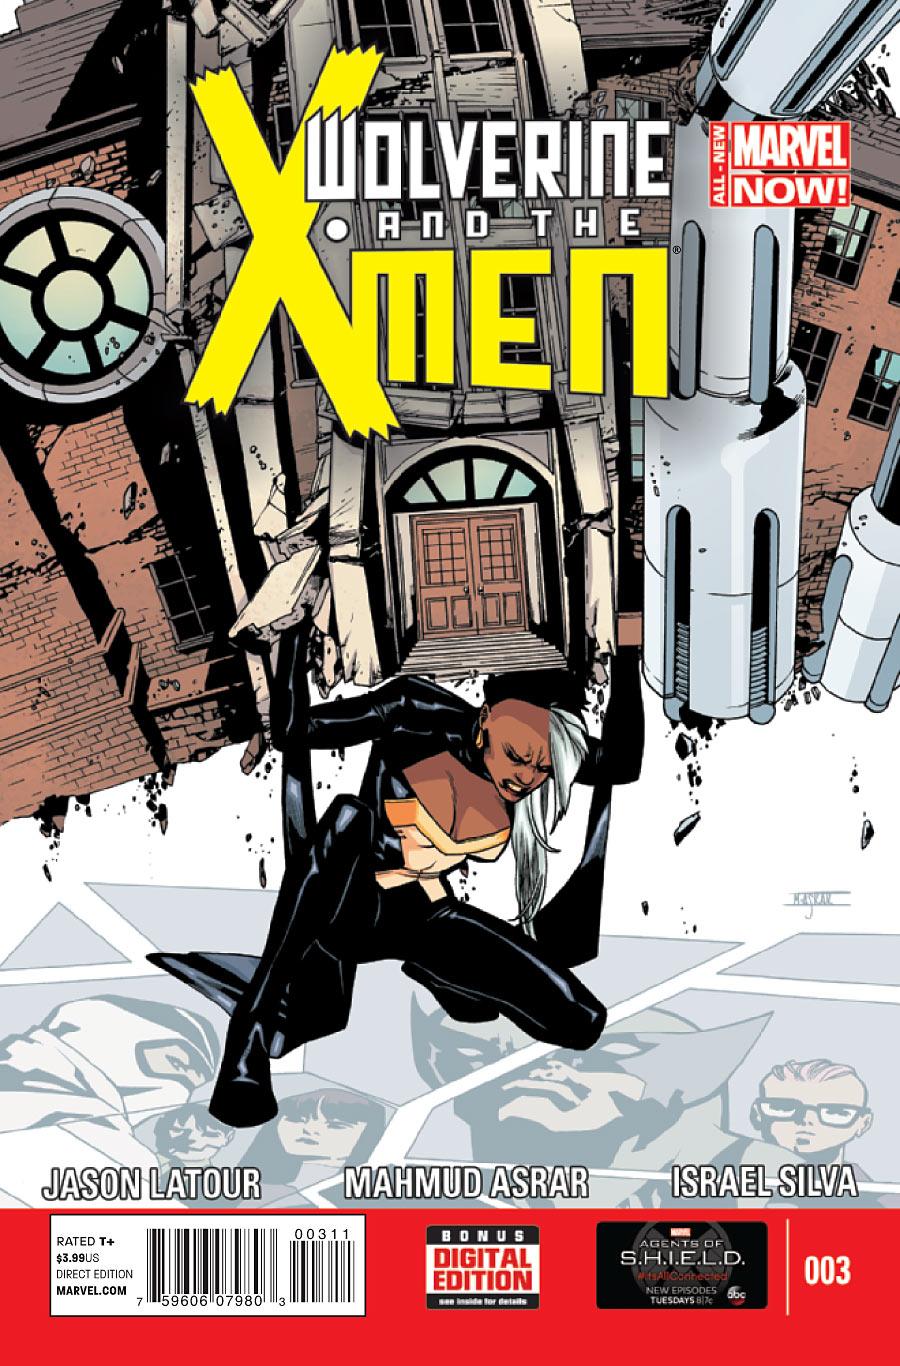 Wolverine and the X-Men Vol. 2 #3